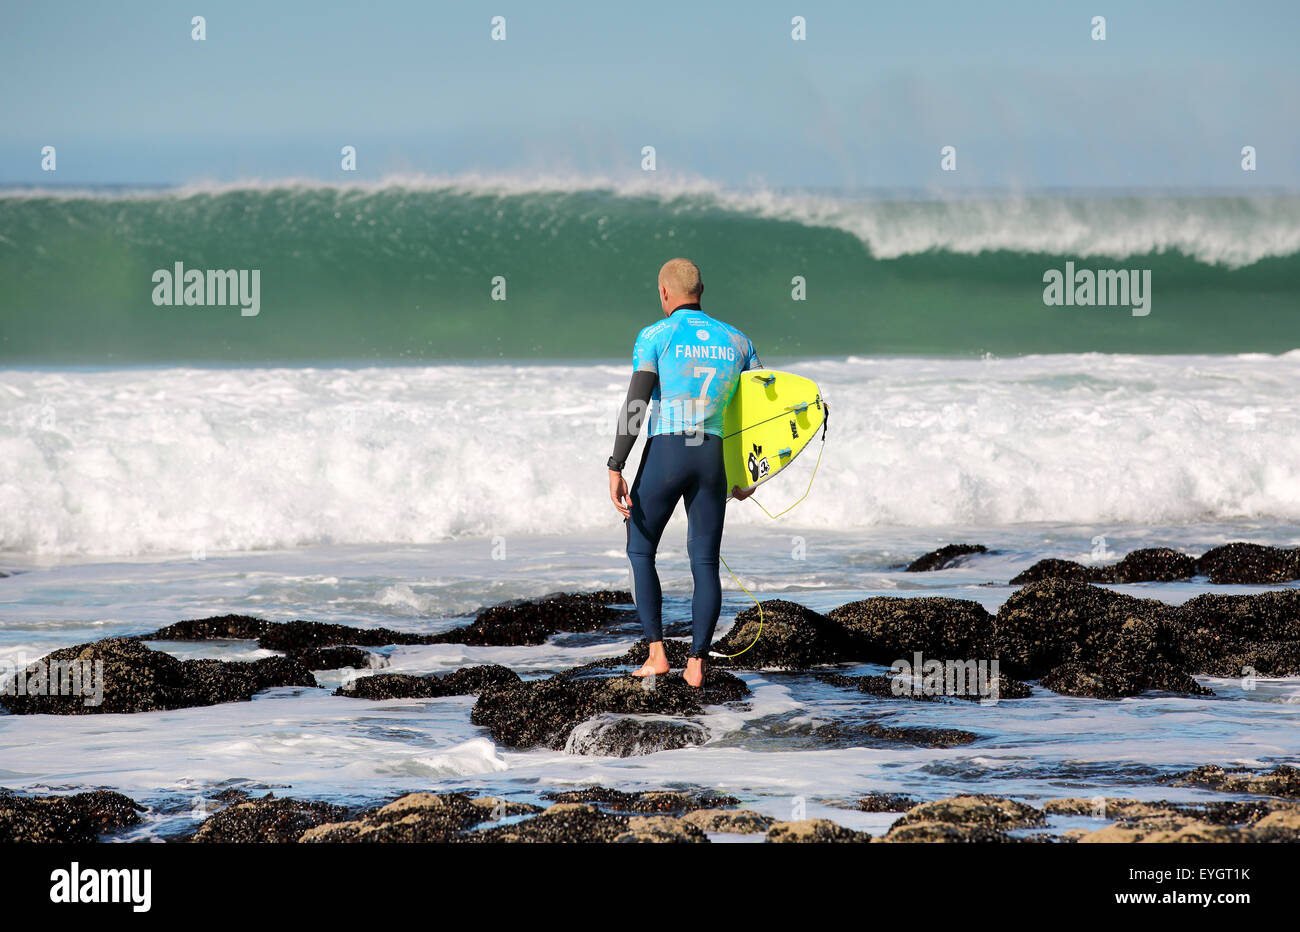 Australian professional surfer Mick Fanning entering the water at the 2015 J-Bay Open surfing event in Jeffreys Bay Stock Photo